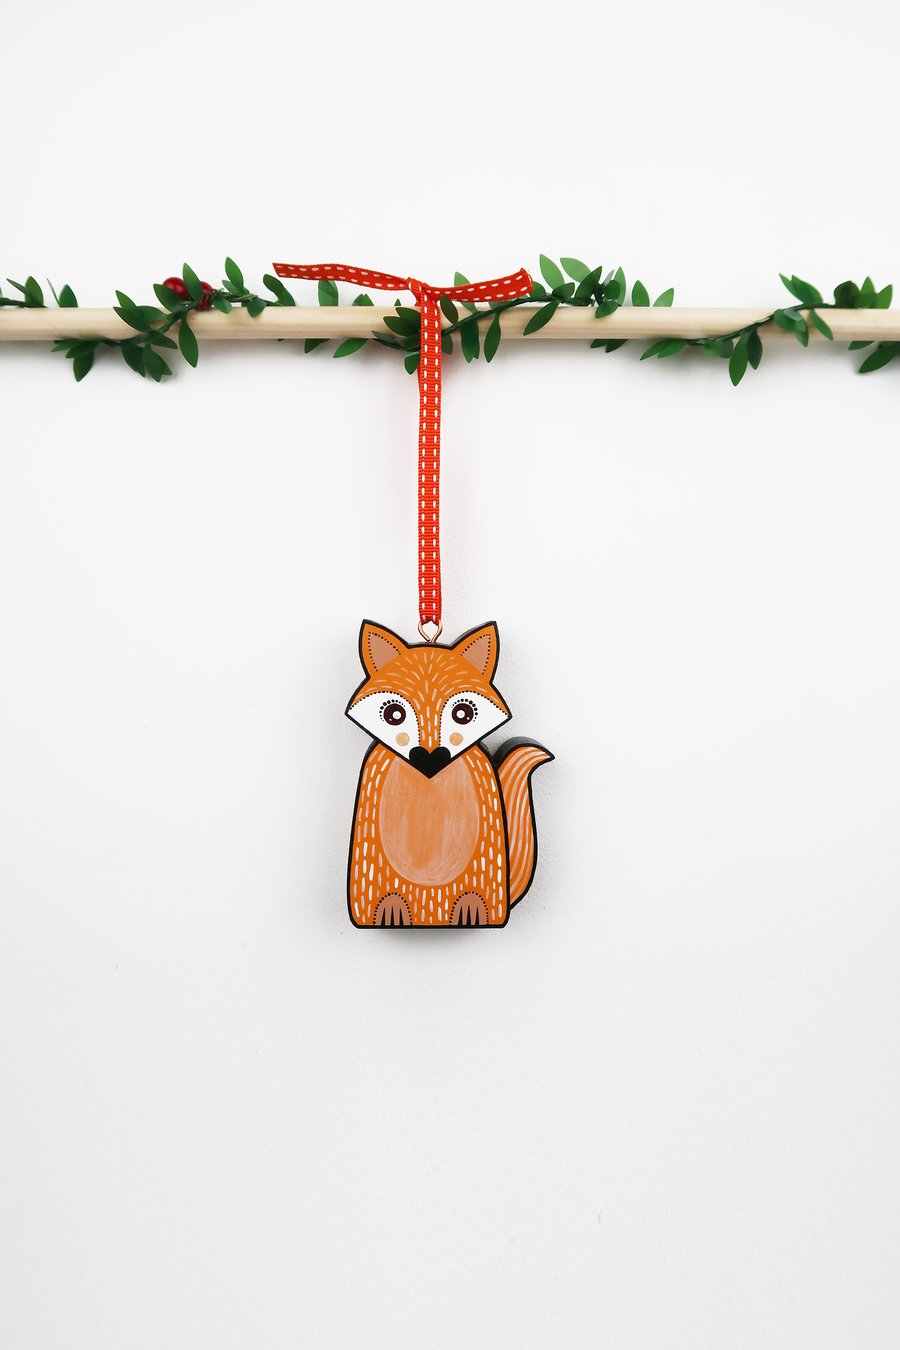 Fox hanging ornament, forest theme wooden decoration